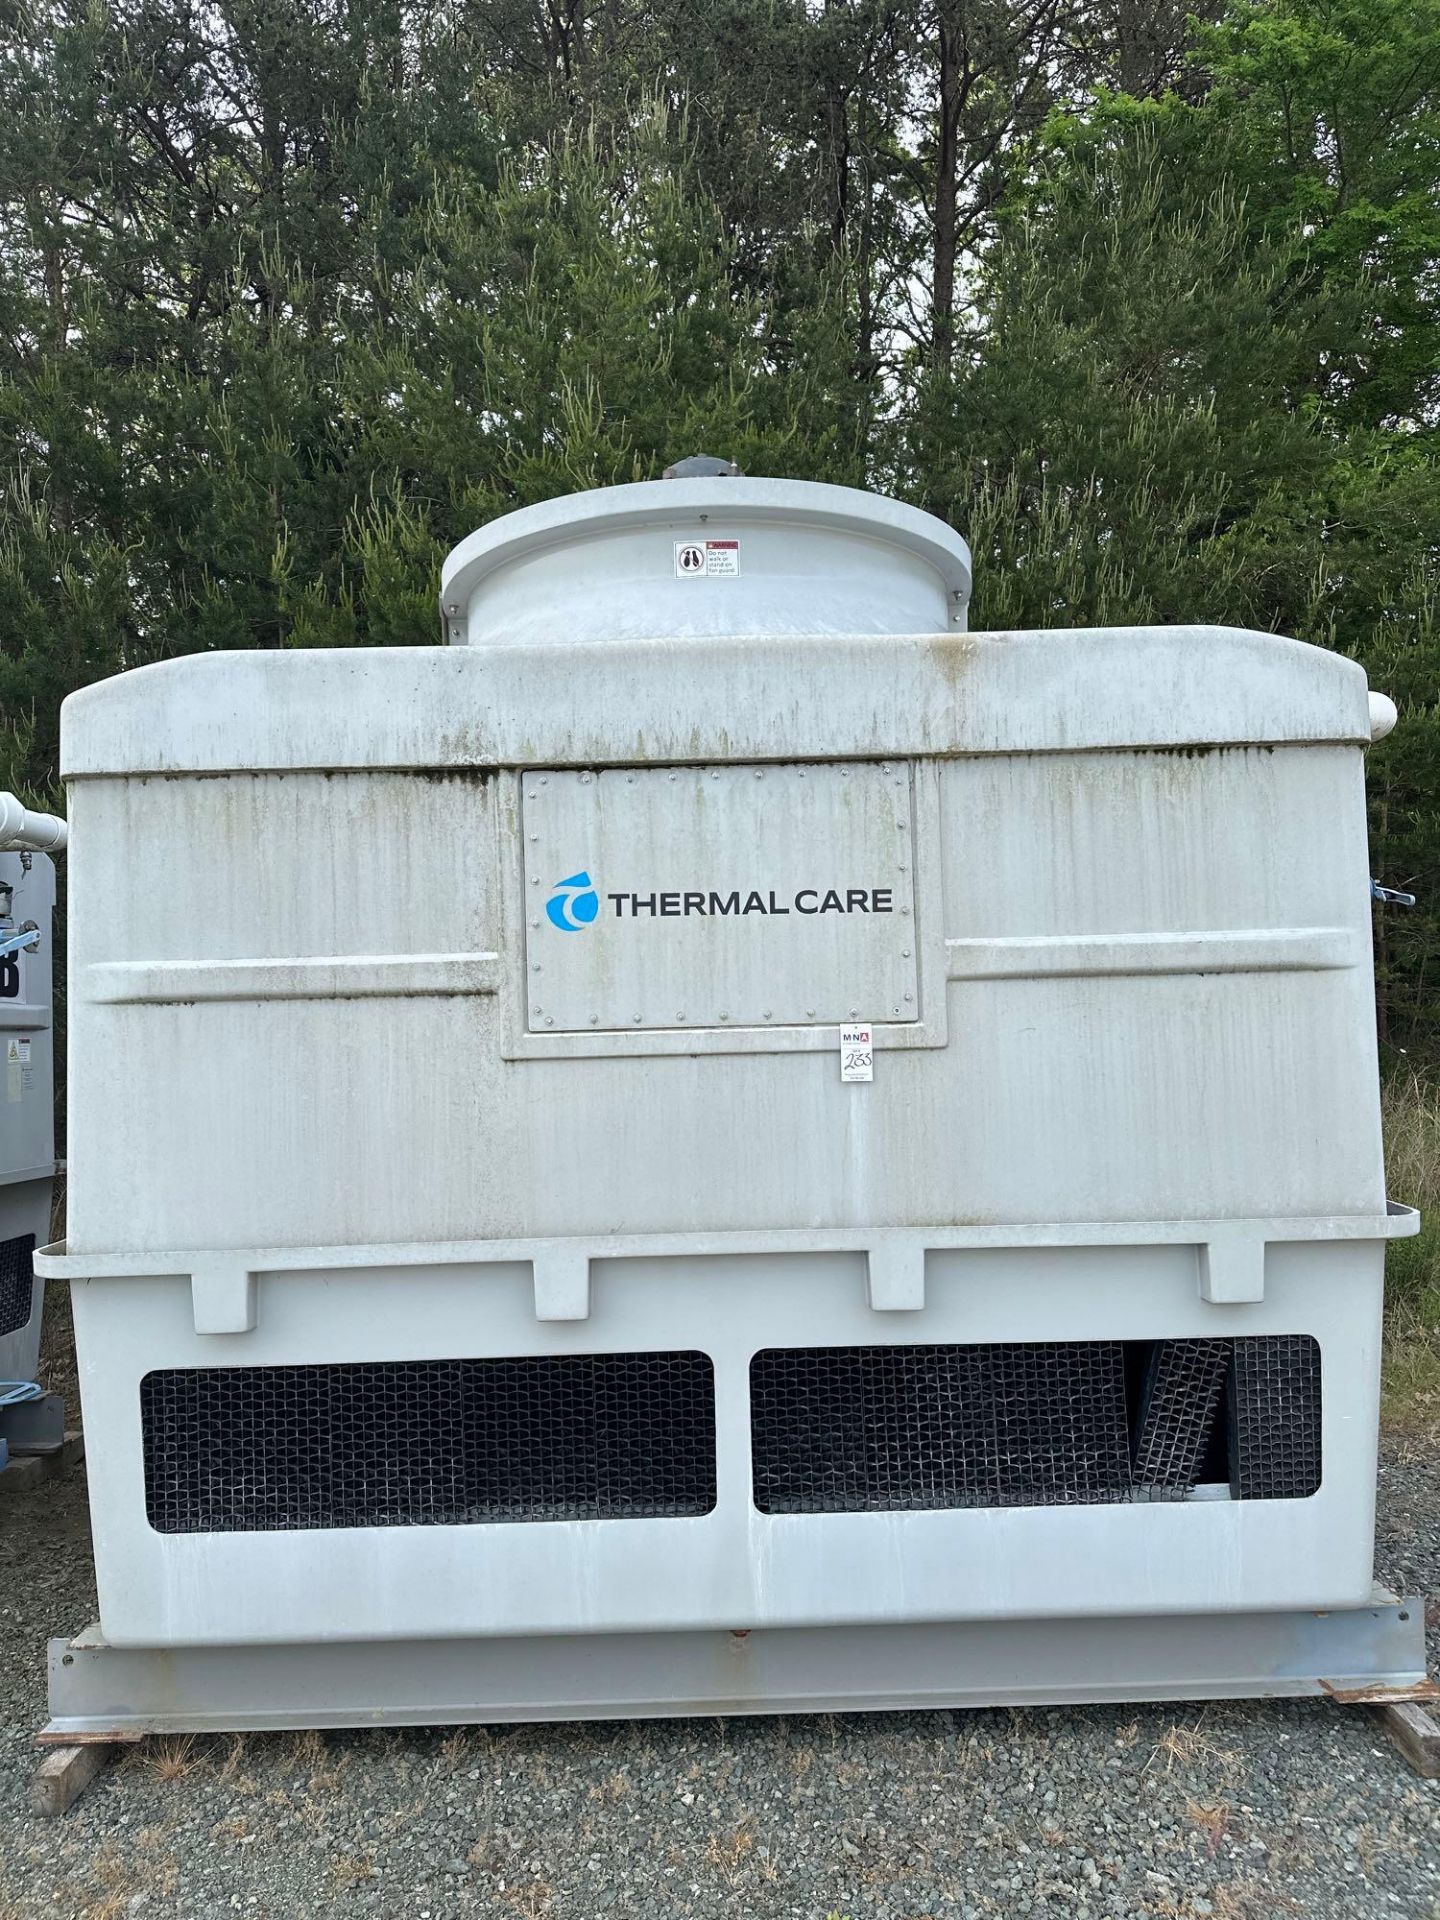 170 Ton Thermal Care Cooling Tower - Image 2 of 5